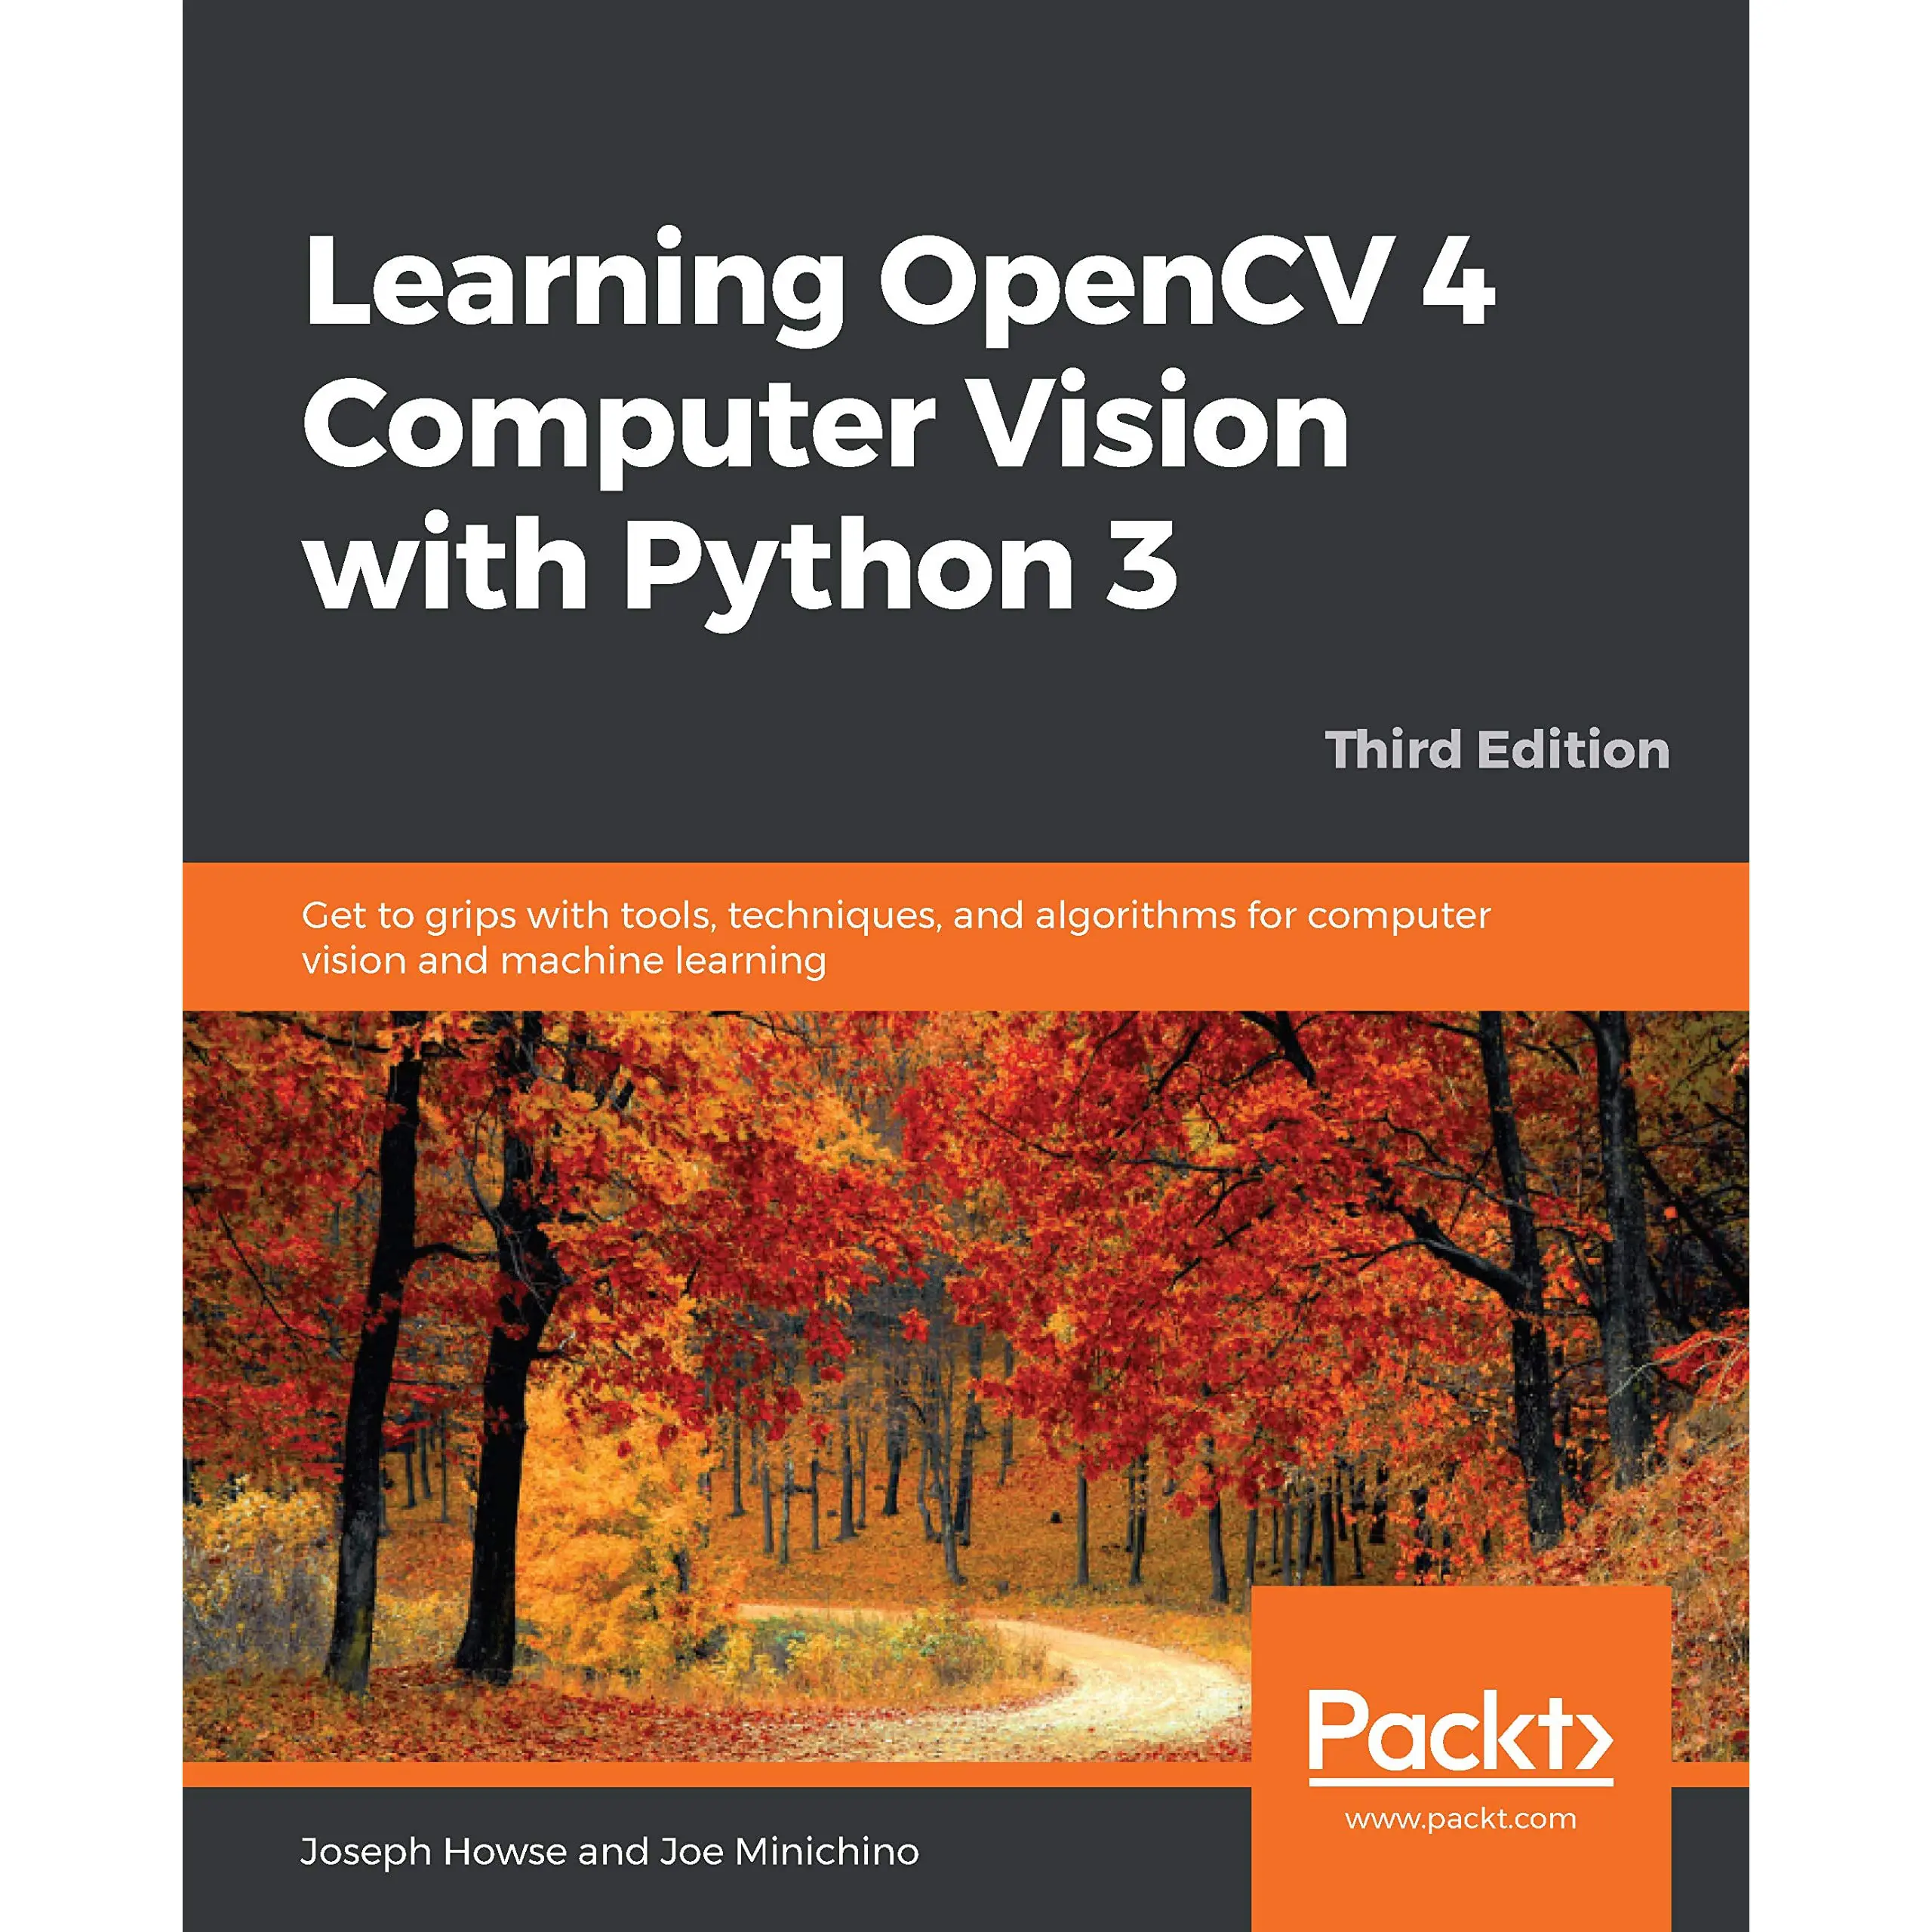 Learning OpenCV 4 computer vision book